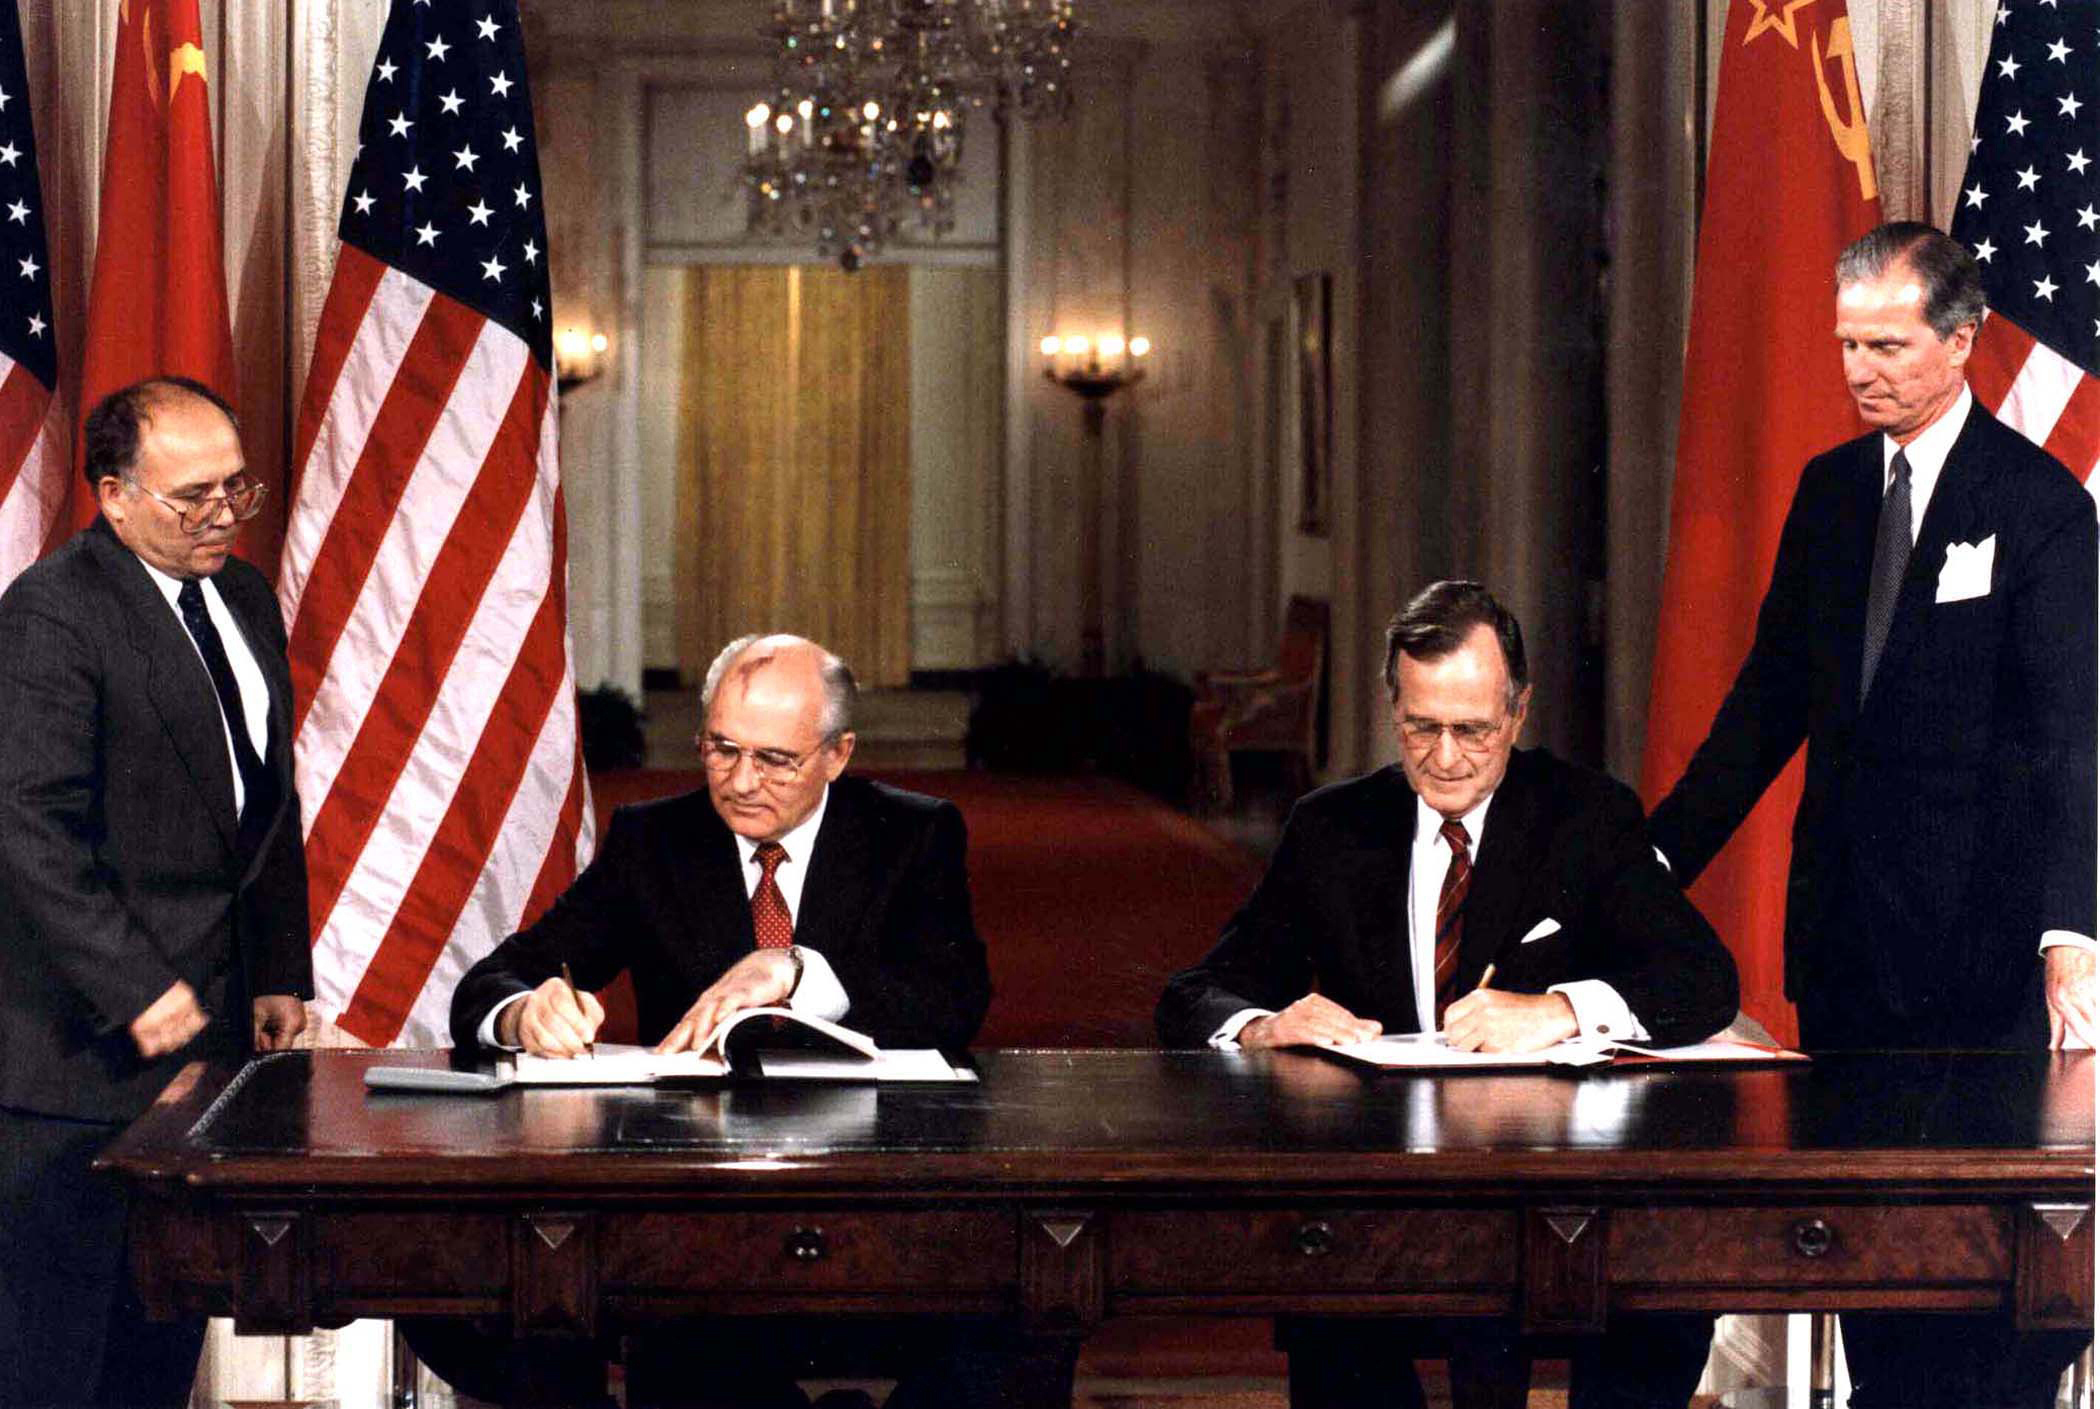 Mikhail Gorbachev survived the August coup, but could not survive the nationalist drive that emerged successively the Baltic States, Russia, and the Ukraine. Nor could the Soviet Union. Although the Bush Administration would later claim to have brought down the Soviet Union, in truth it was dedicated to keeping the union and Gorbachev afloat.